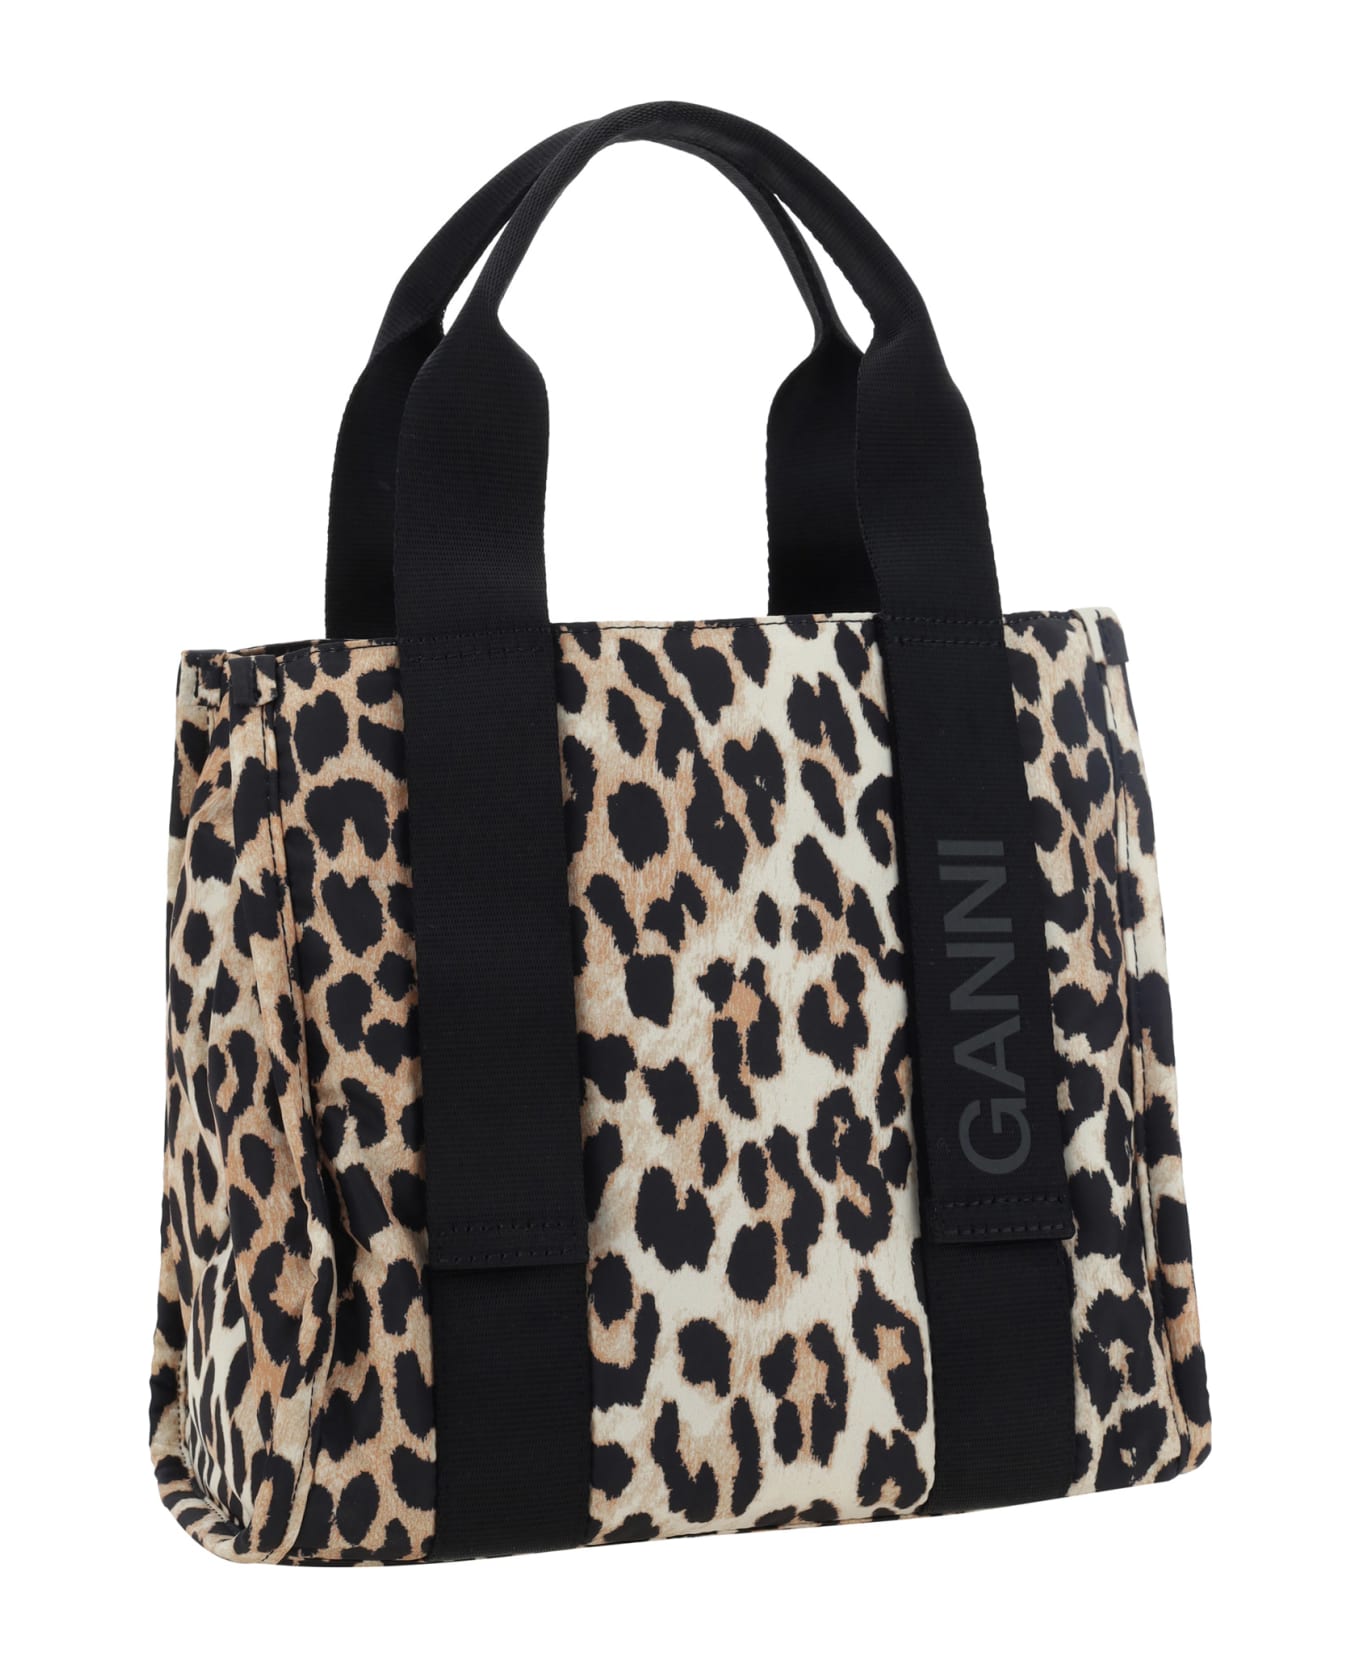 Ganni Recycled Tech Tote Bag - Leopard